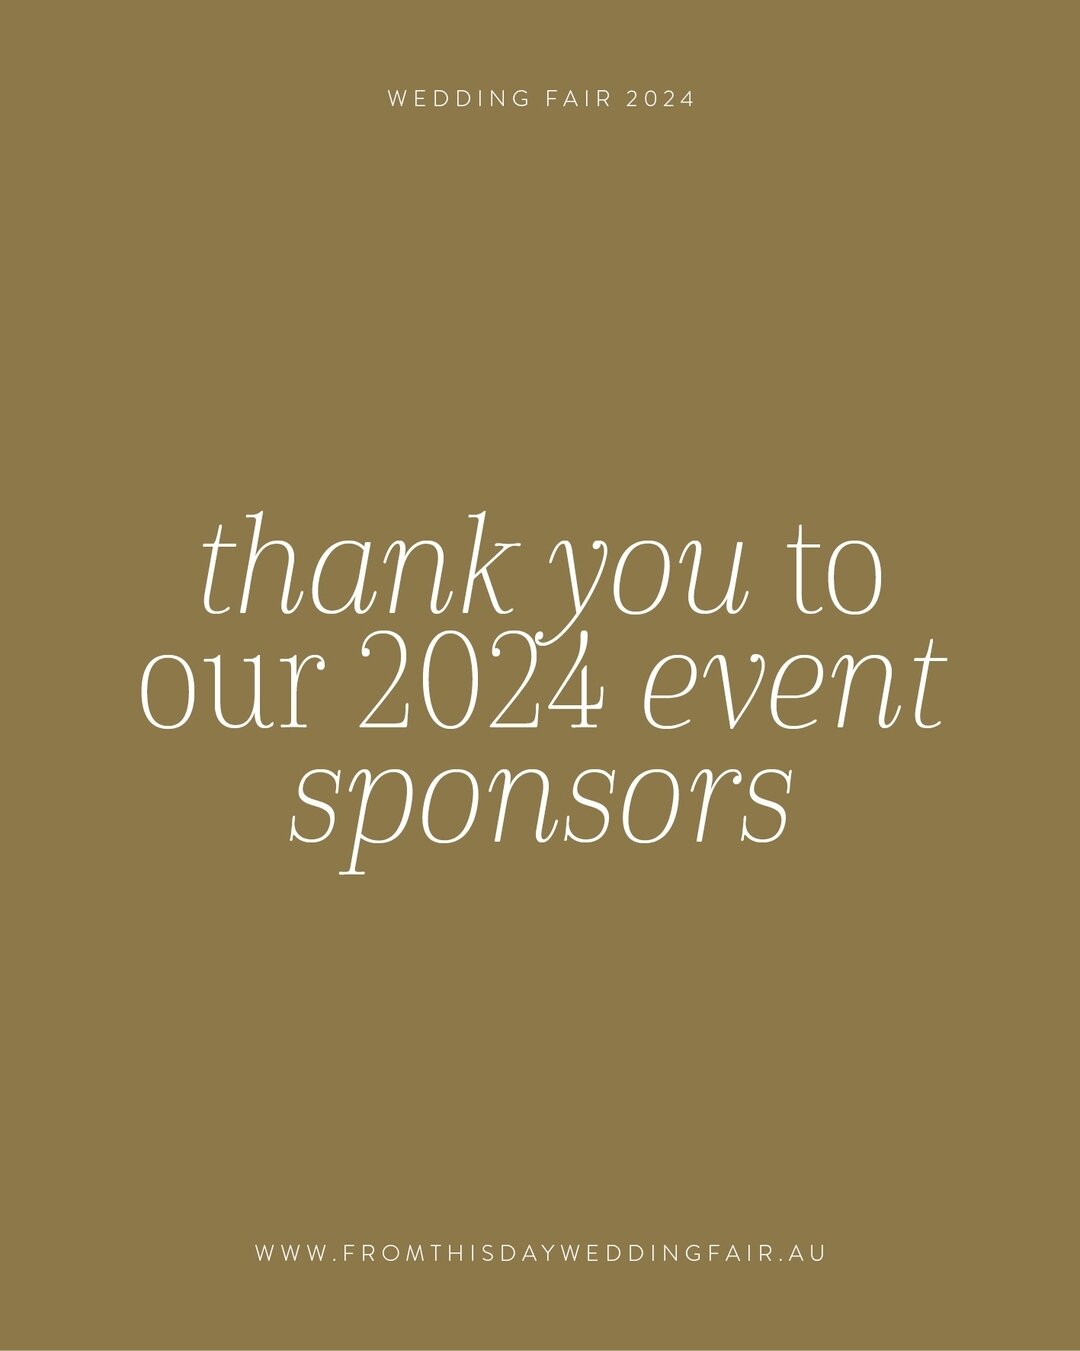 A huge thank you to our 2024 sponsors, we can't wait to see what they have in store for you all on the day!

@sabinariverfarm @fromthisdayweddingfair @fromthisdayweddings @sweventstudio @burst.away @becrobson_photography @shelterbrewingco @credarowed